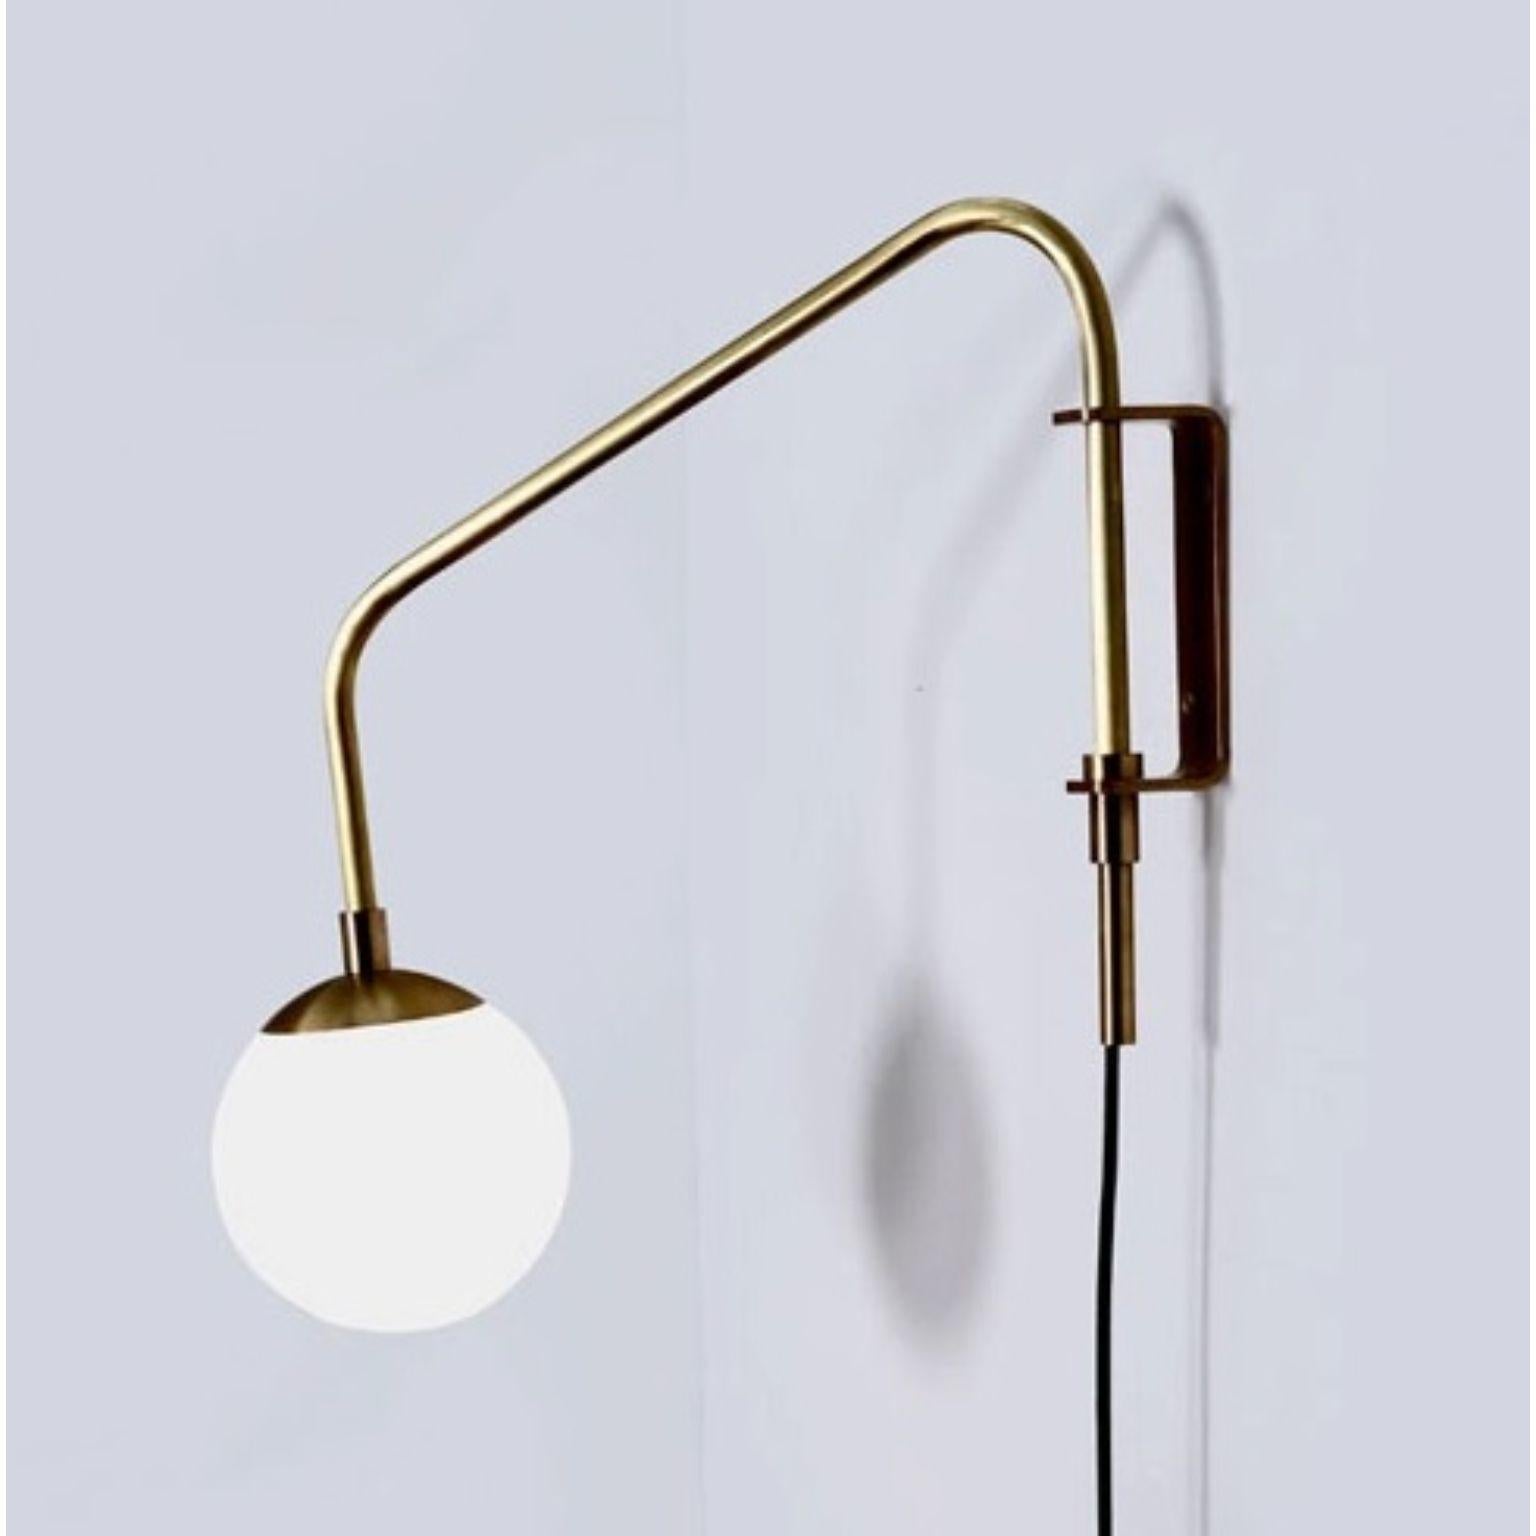 Float One Arm Glass Globe Wall Sconce by Lamp Shaper
Dimensions: D 79 x W 43 x H 38 cm.
Materials: Brass and glass.

Different finishes available: raw brass, aged brass, burnt brass and brushed brass Please contact us.

All our lamps can be wired